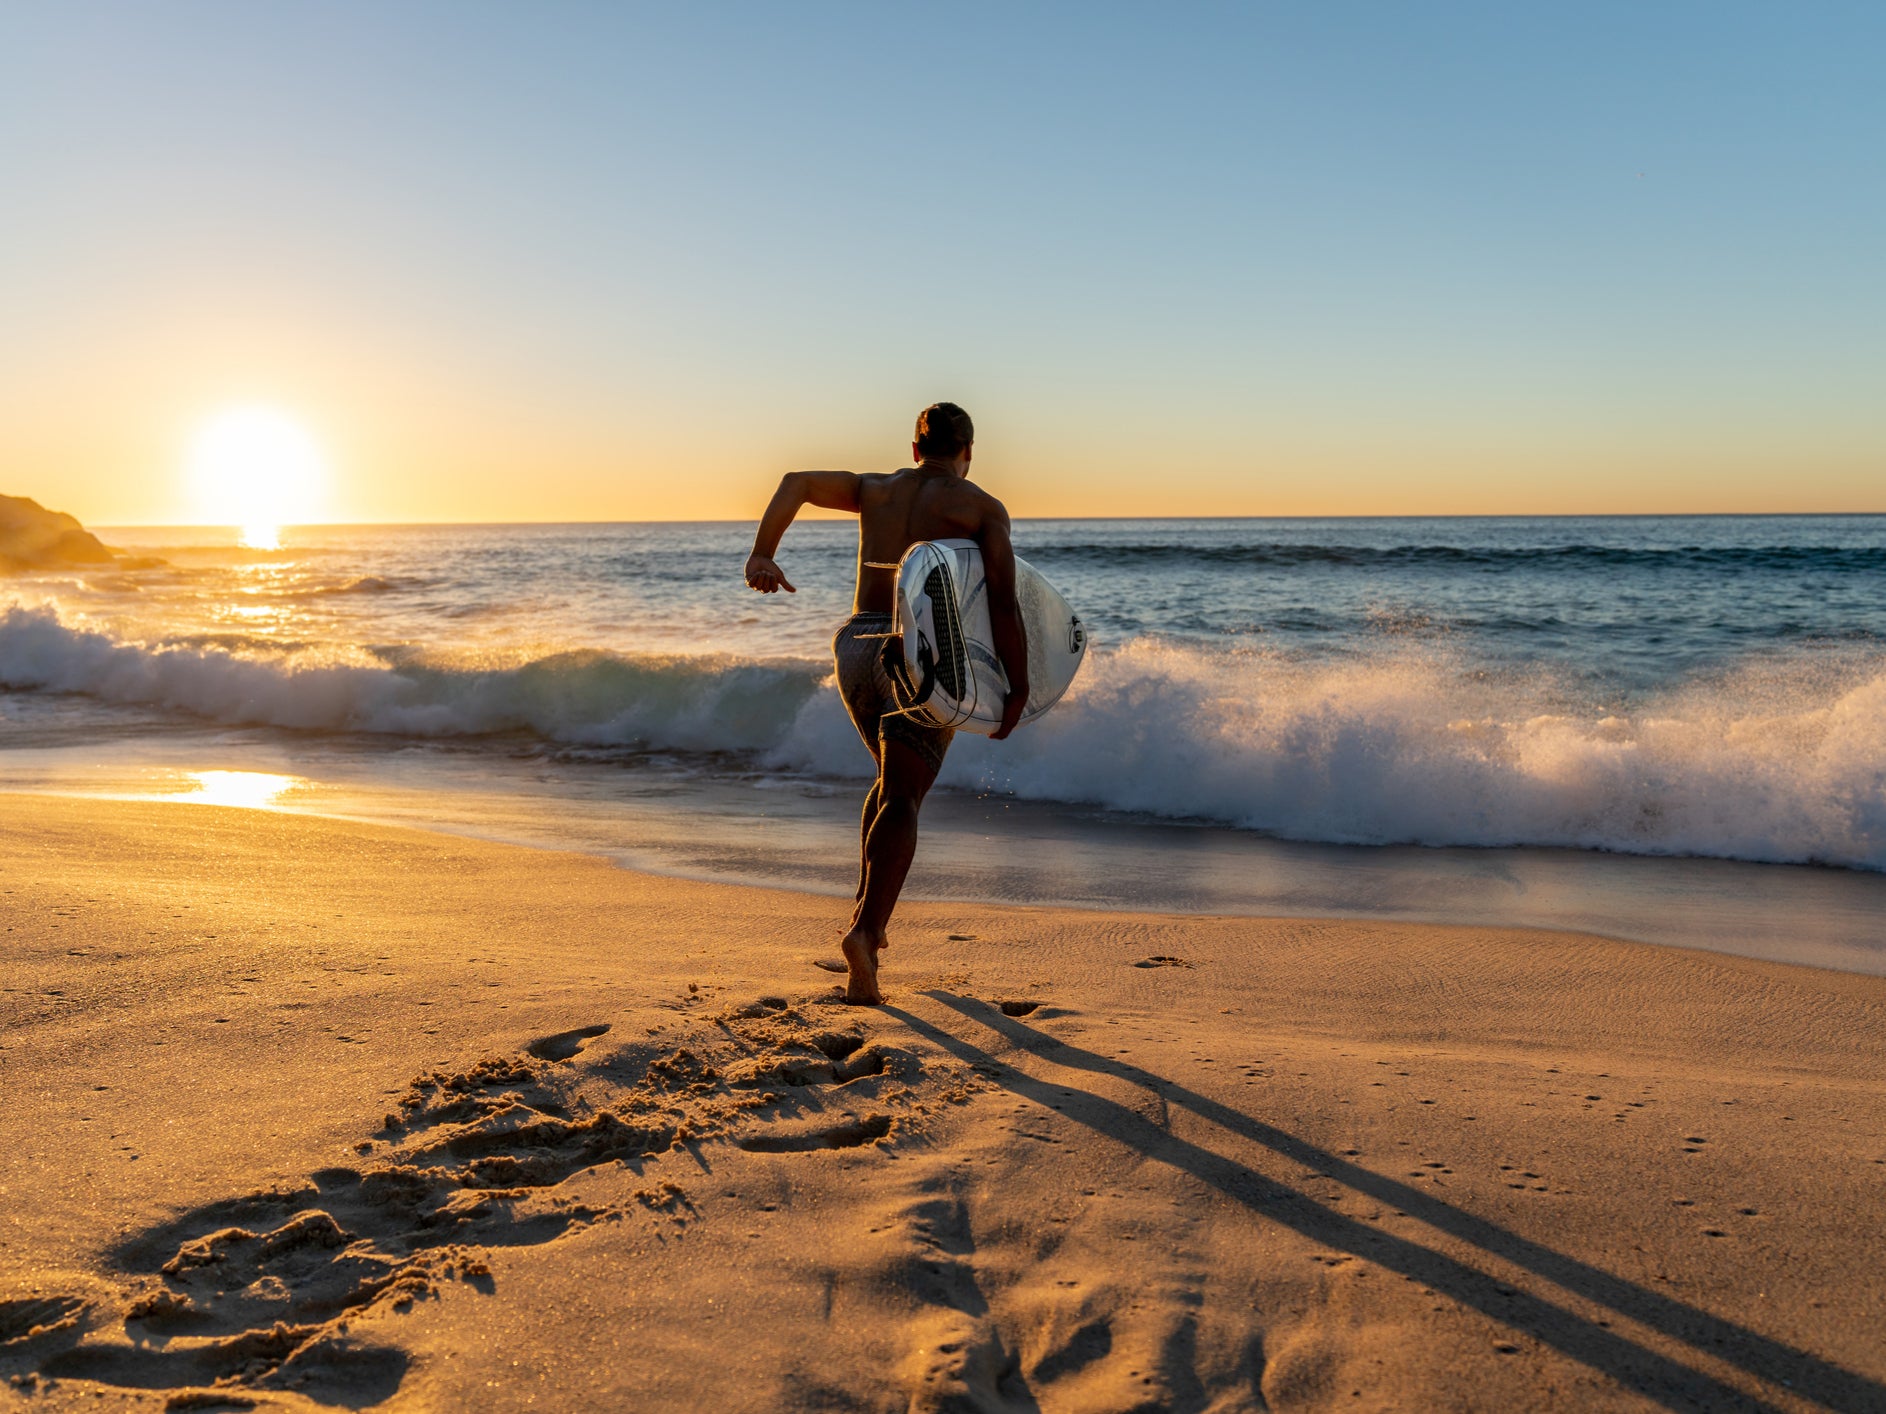 A company is seeking to entice NHS doctors to Australia with the promise of 20 days off each month to ‘travel and surf'